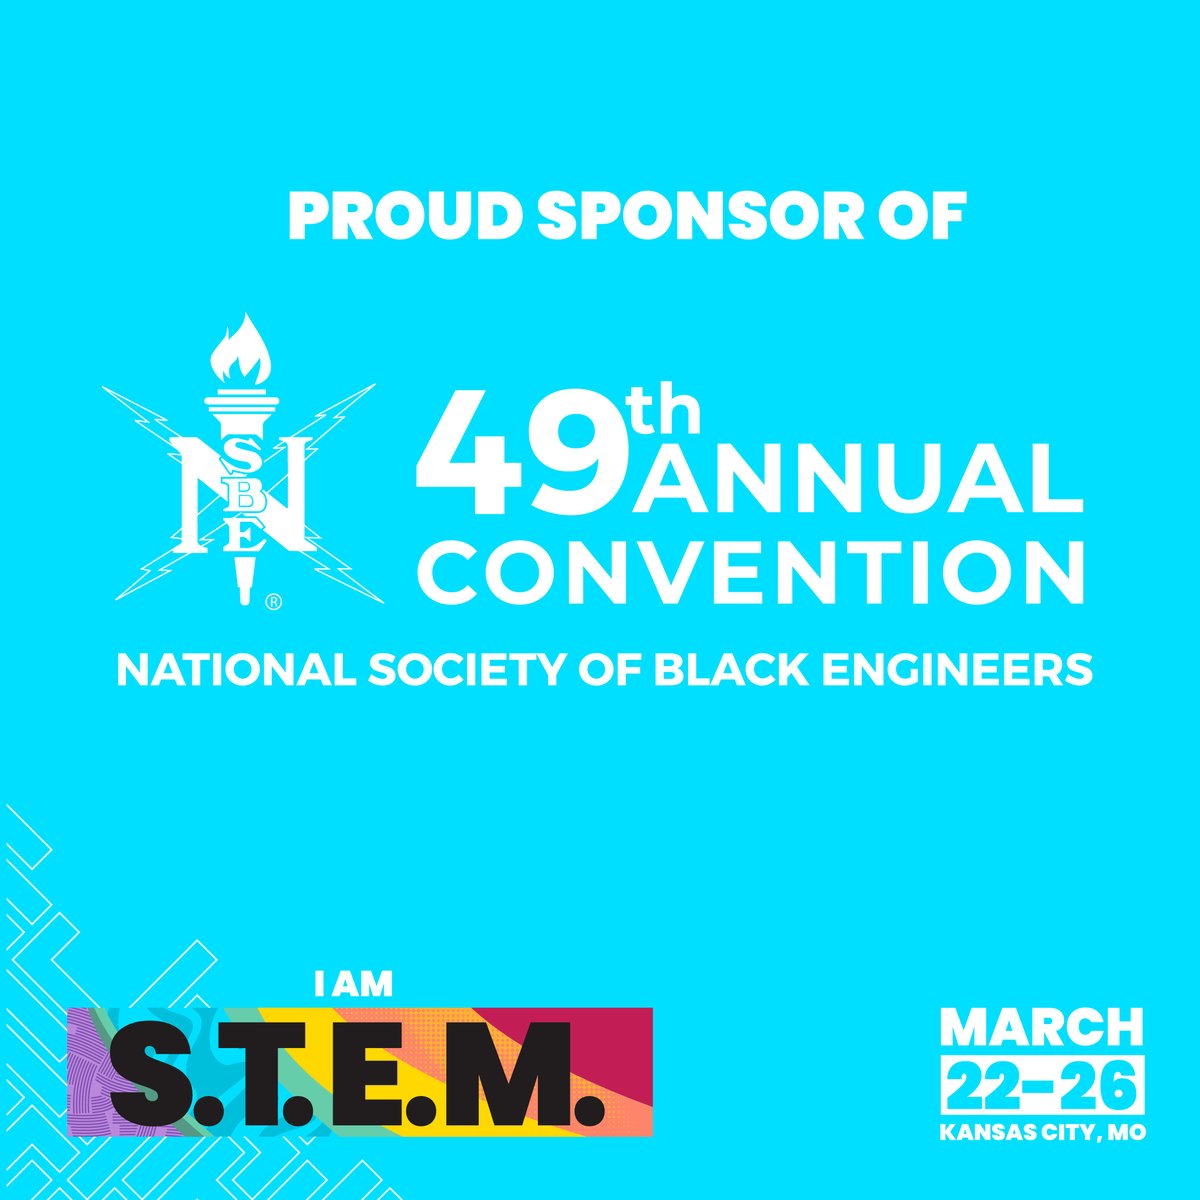 We're proud to sponsor the 49th annual convention of the National Society of Black Engineers! 👏👏👏

#NSBE #NSBE49 #IAMSTEM #BLACKENGINEERS